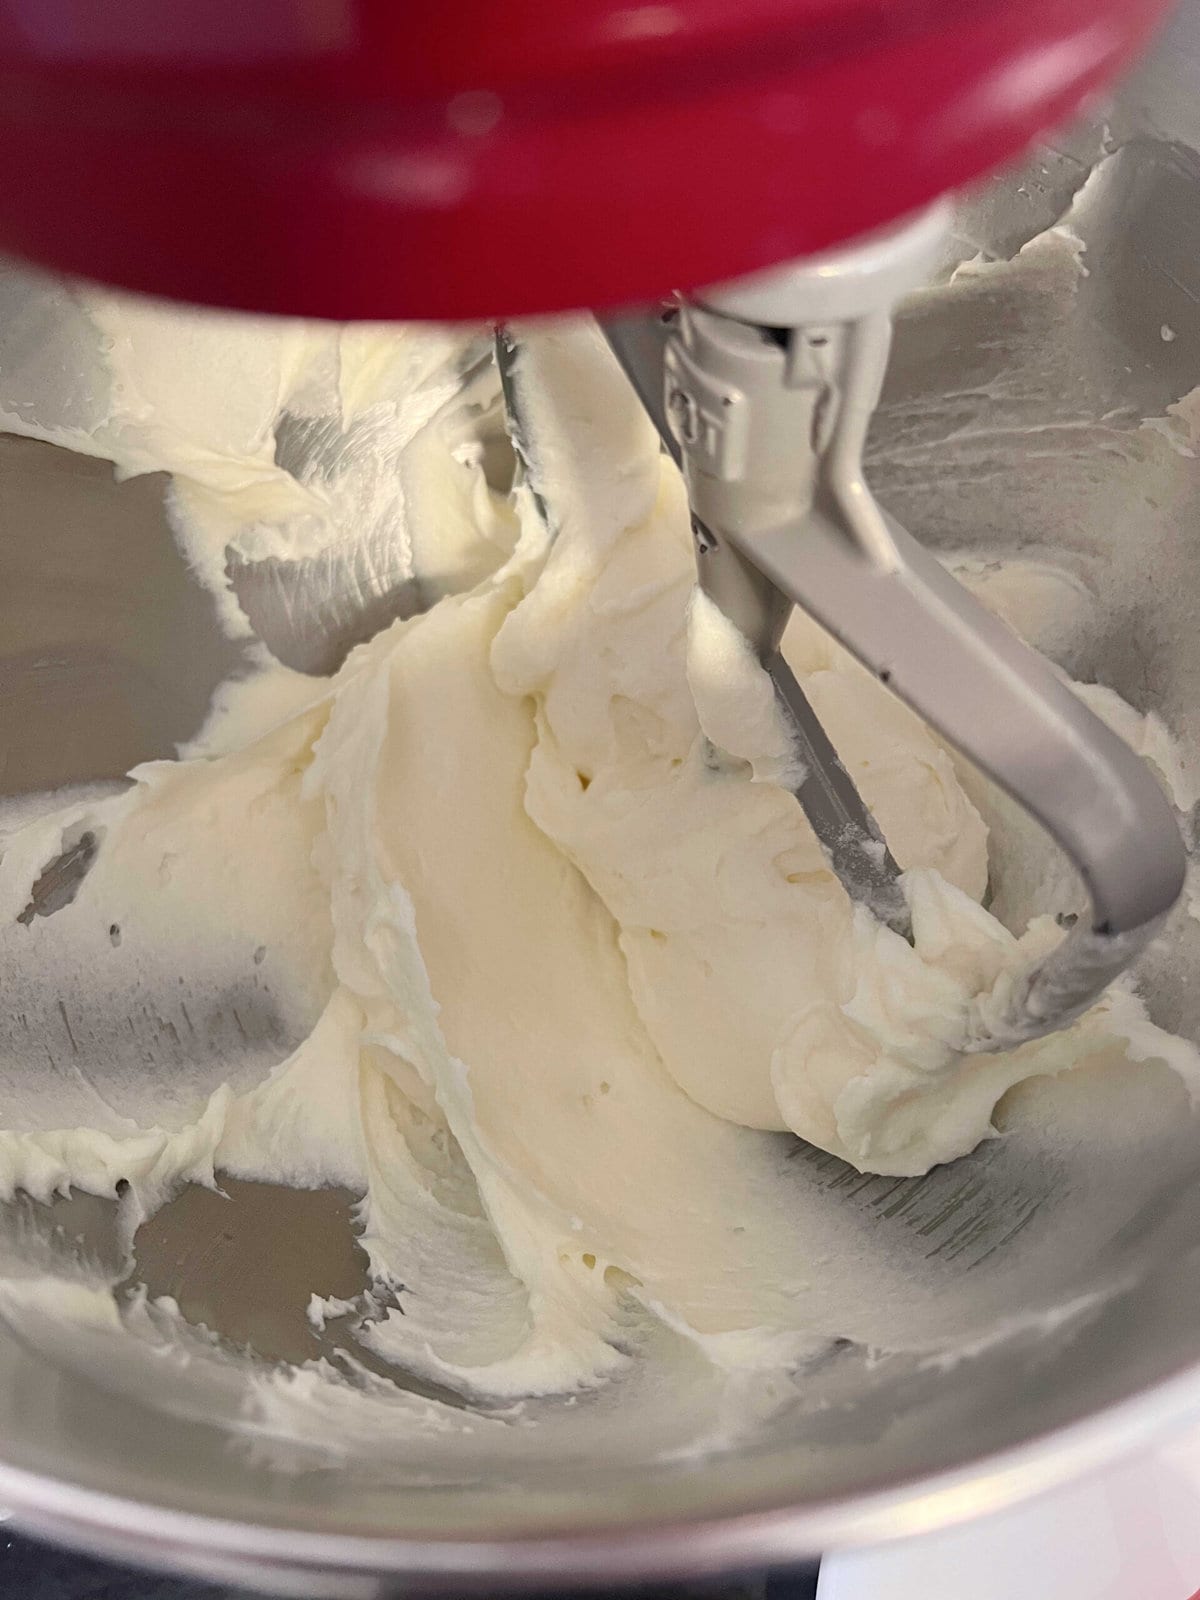 Mixture of butter, cream cheese, and sugar in mixing bowl.